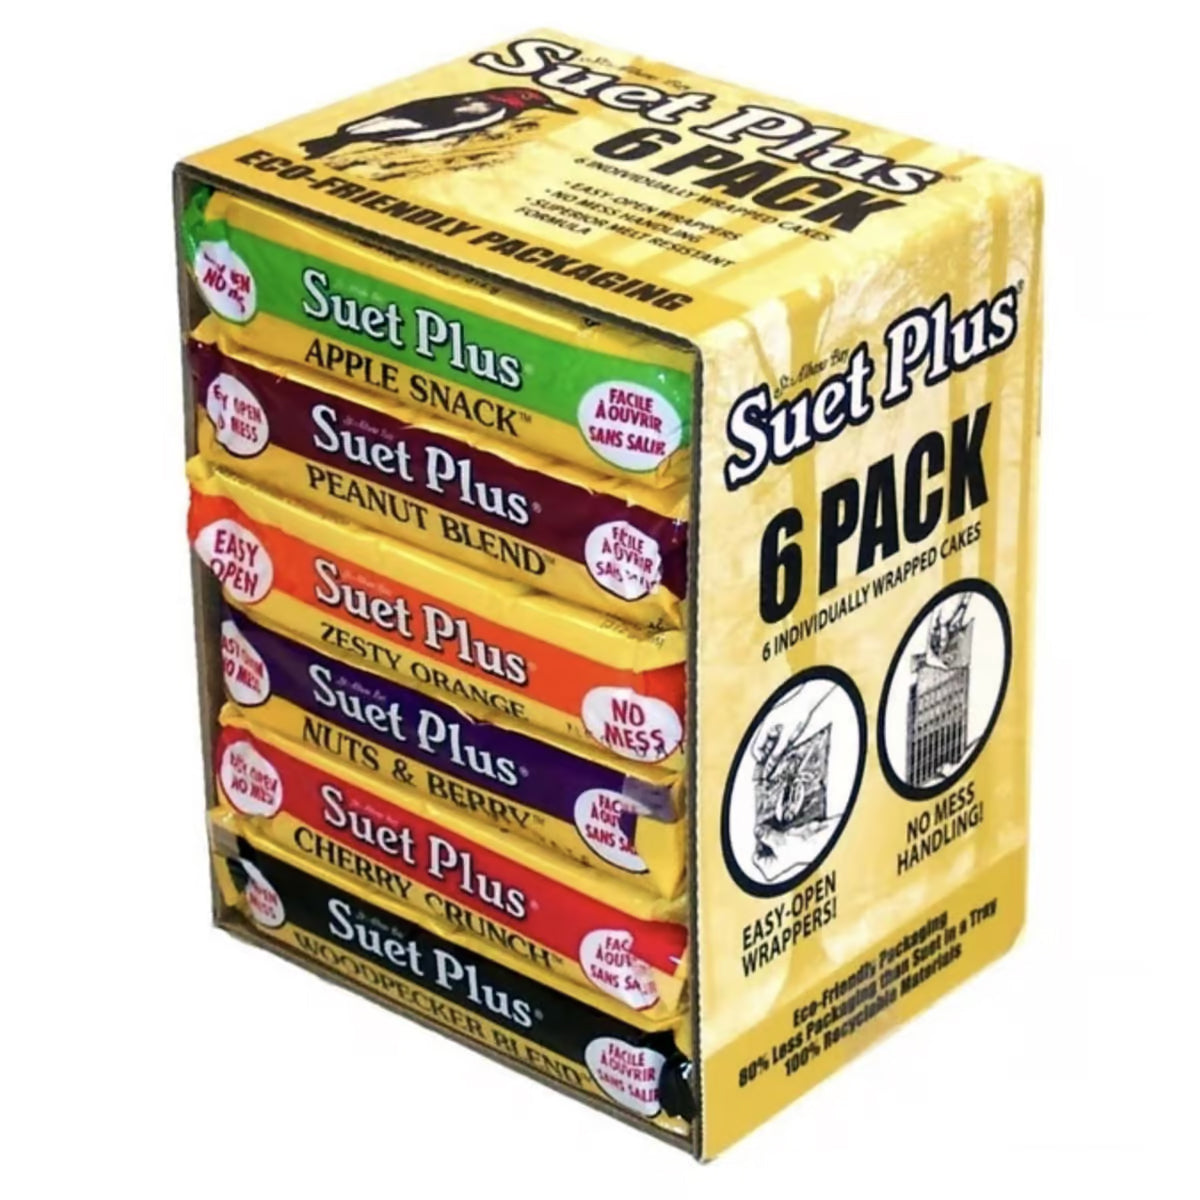 St. Albans Bay Suet Plus Variety Pack - 6 Cakes